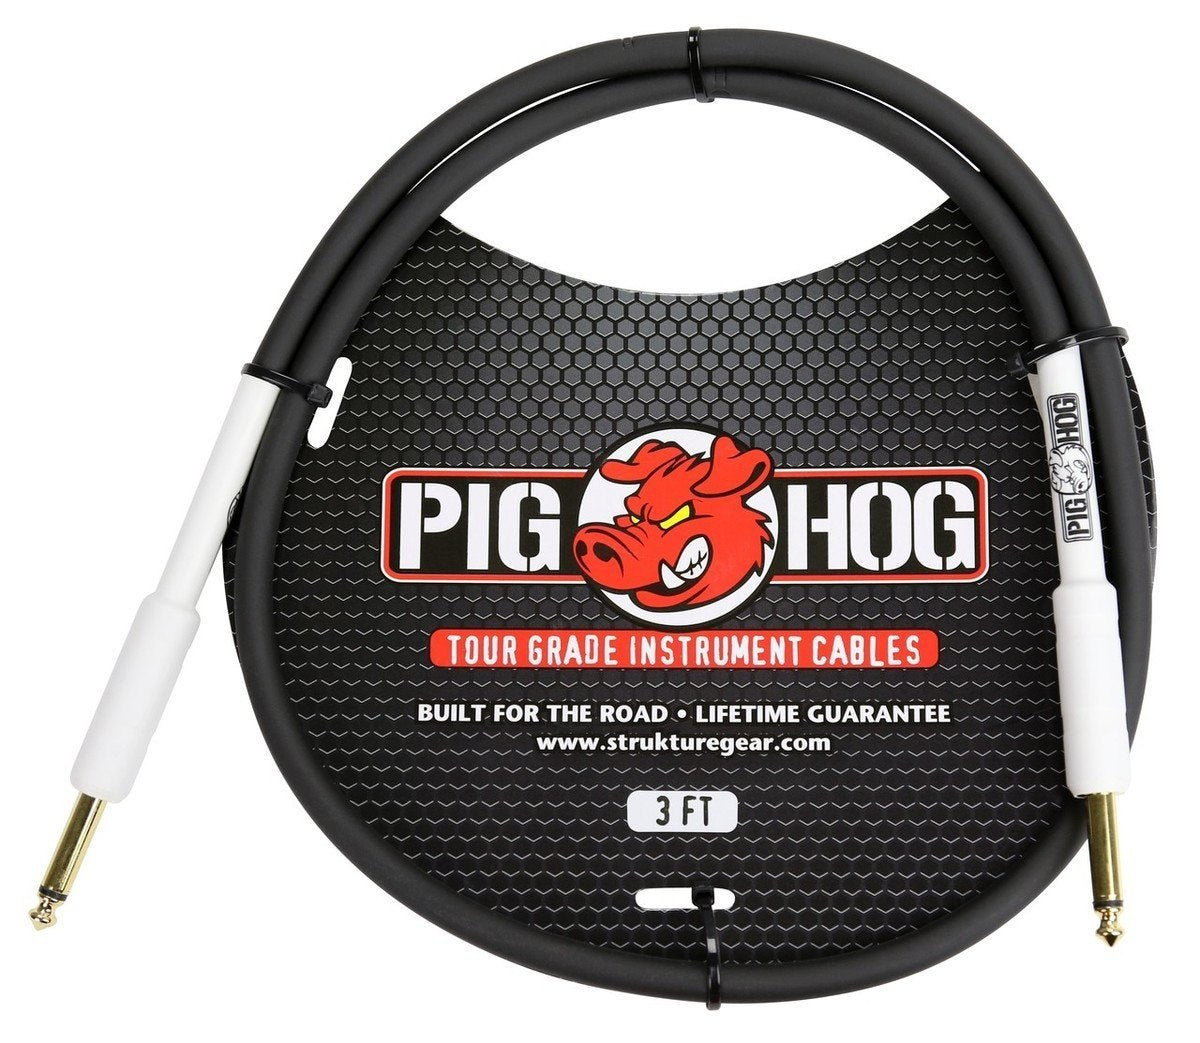 Pig Hog Cables Instrument Cable 3ft